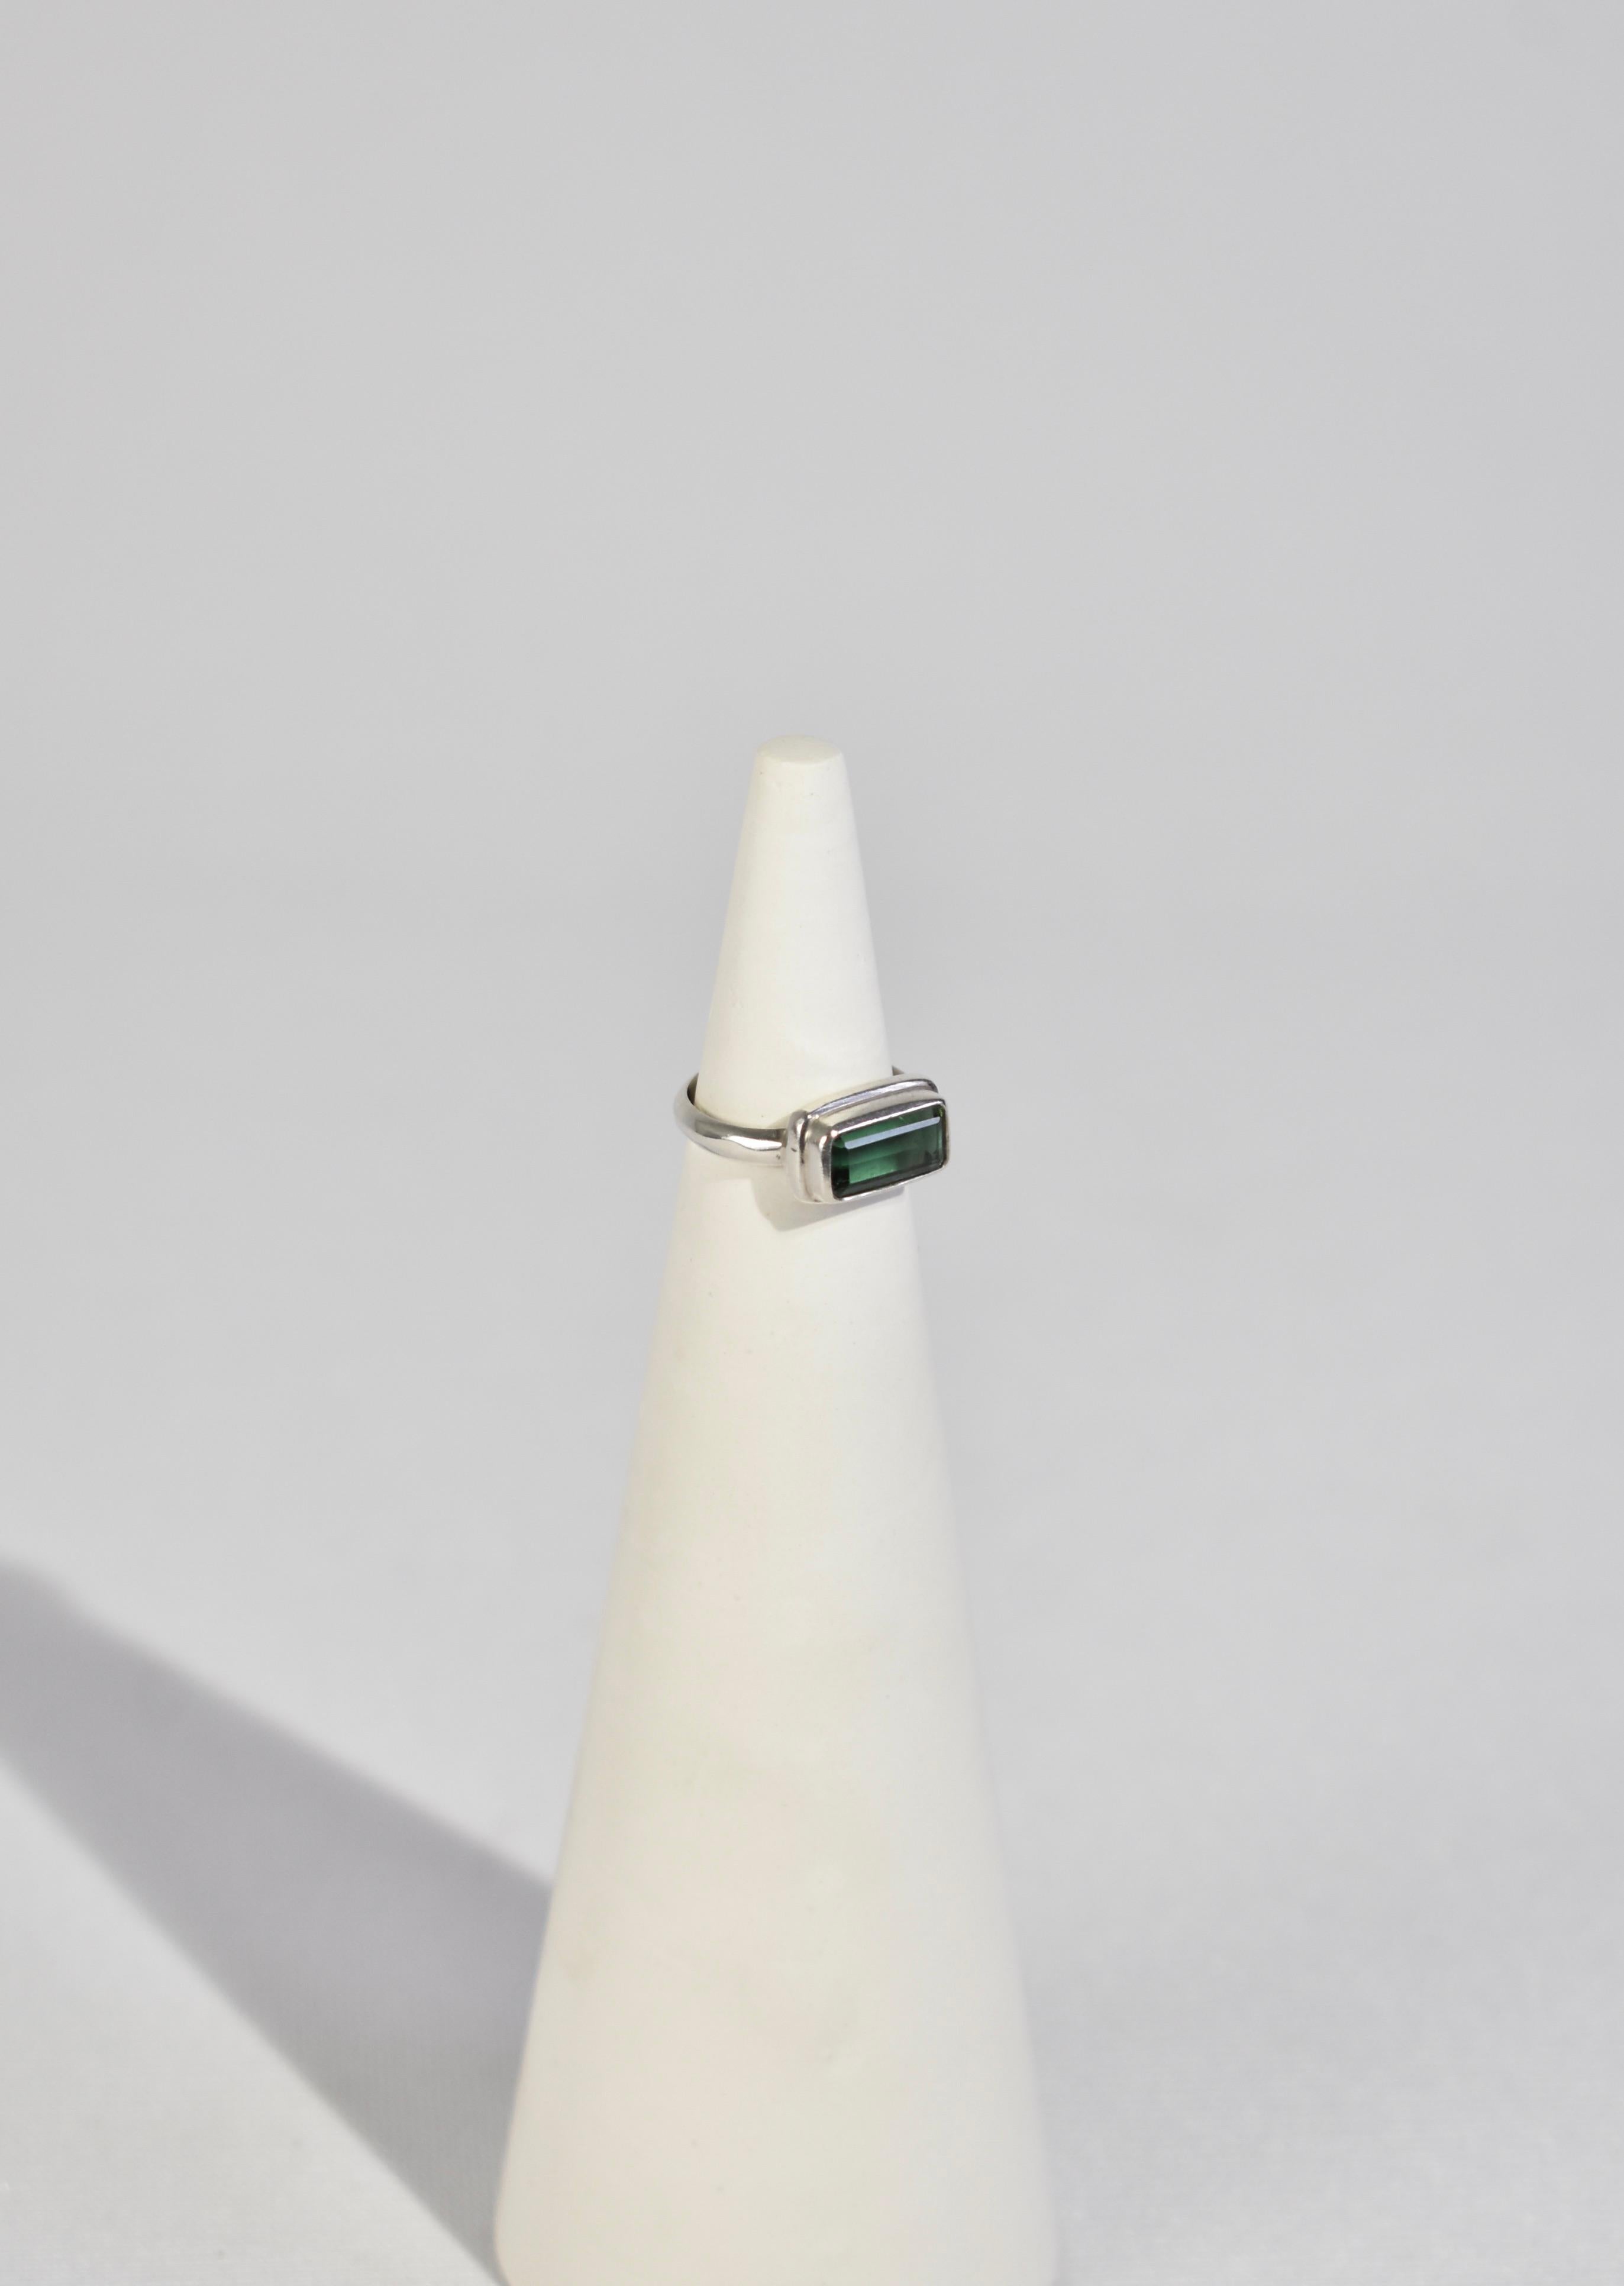 Vintage sterling ring with rectangular faceted glass detail. Stamped 925.

Material: Sterling silver, glass.

